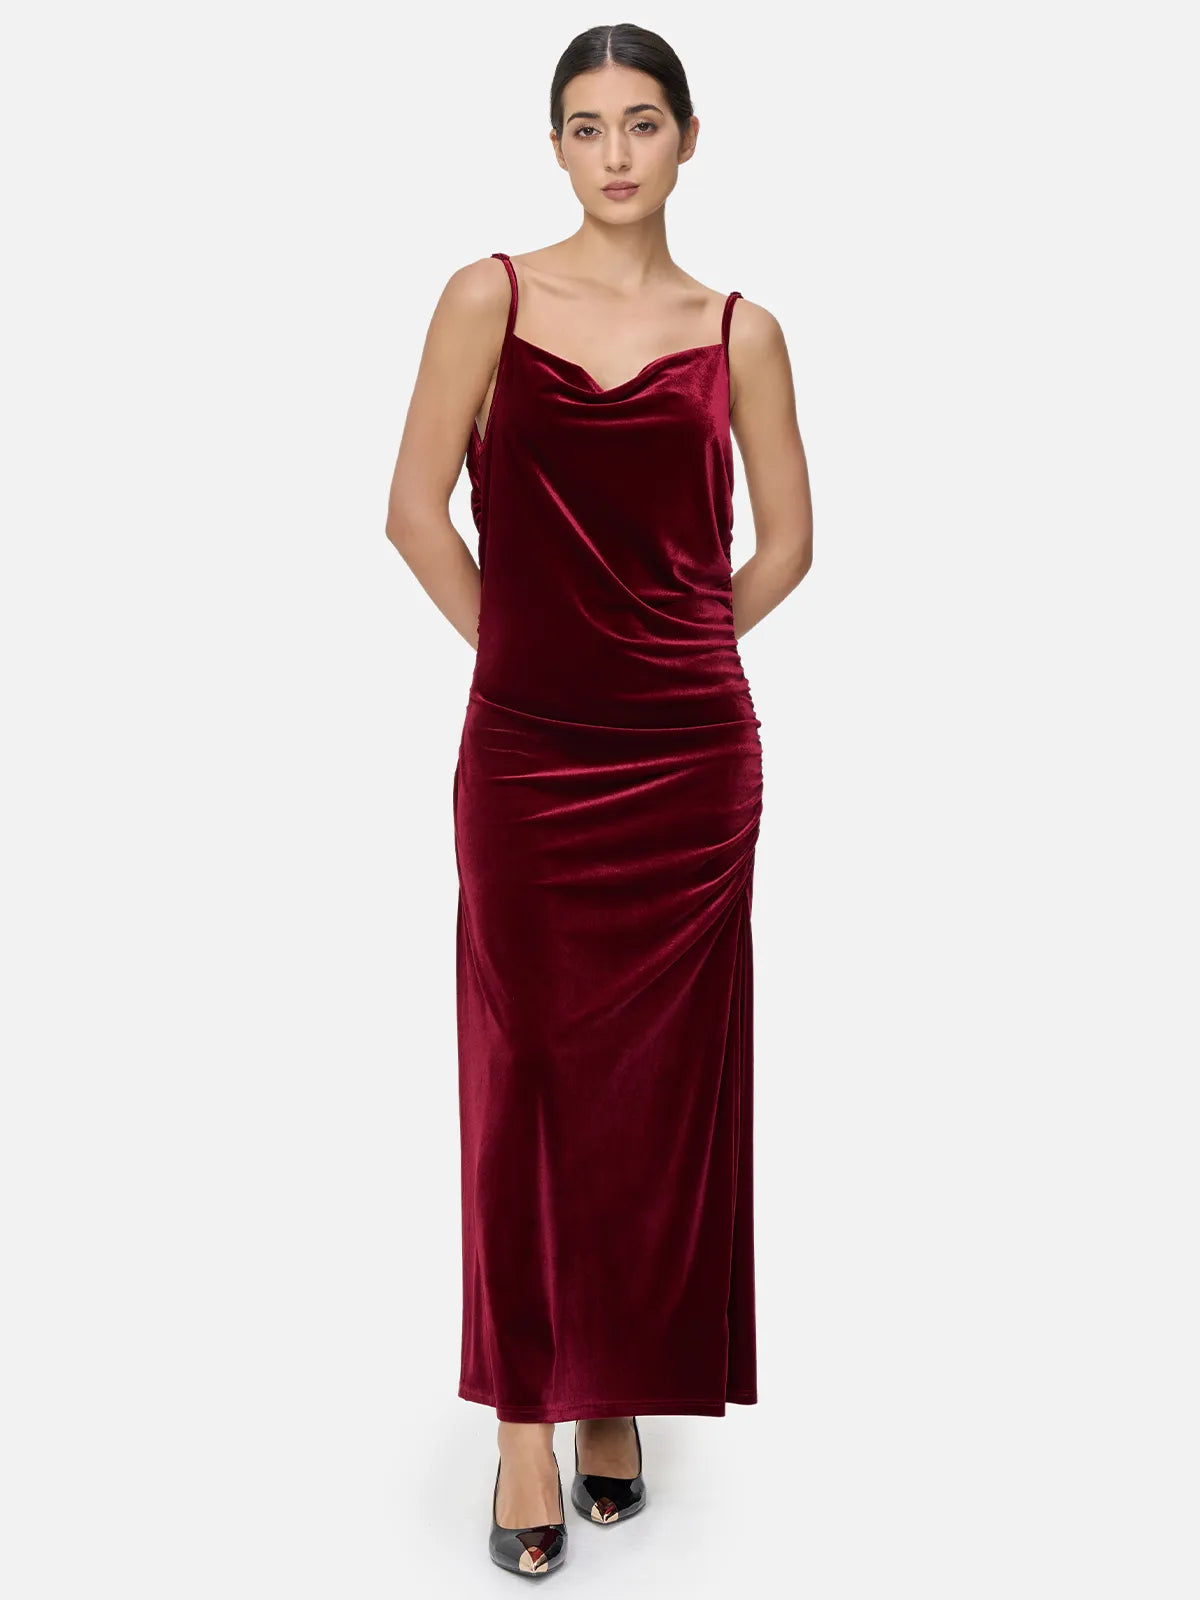 Fashionable and romantic women&#39;s clothing with irregular V-neck design and pleated detailing in a velvet spaghetti strap maxi dress